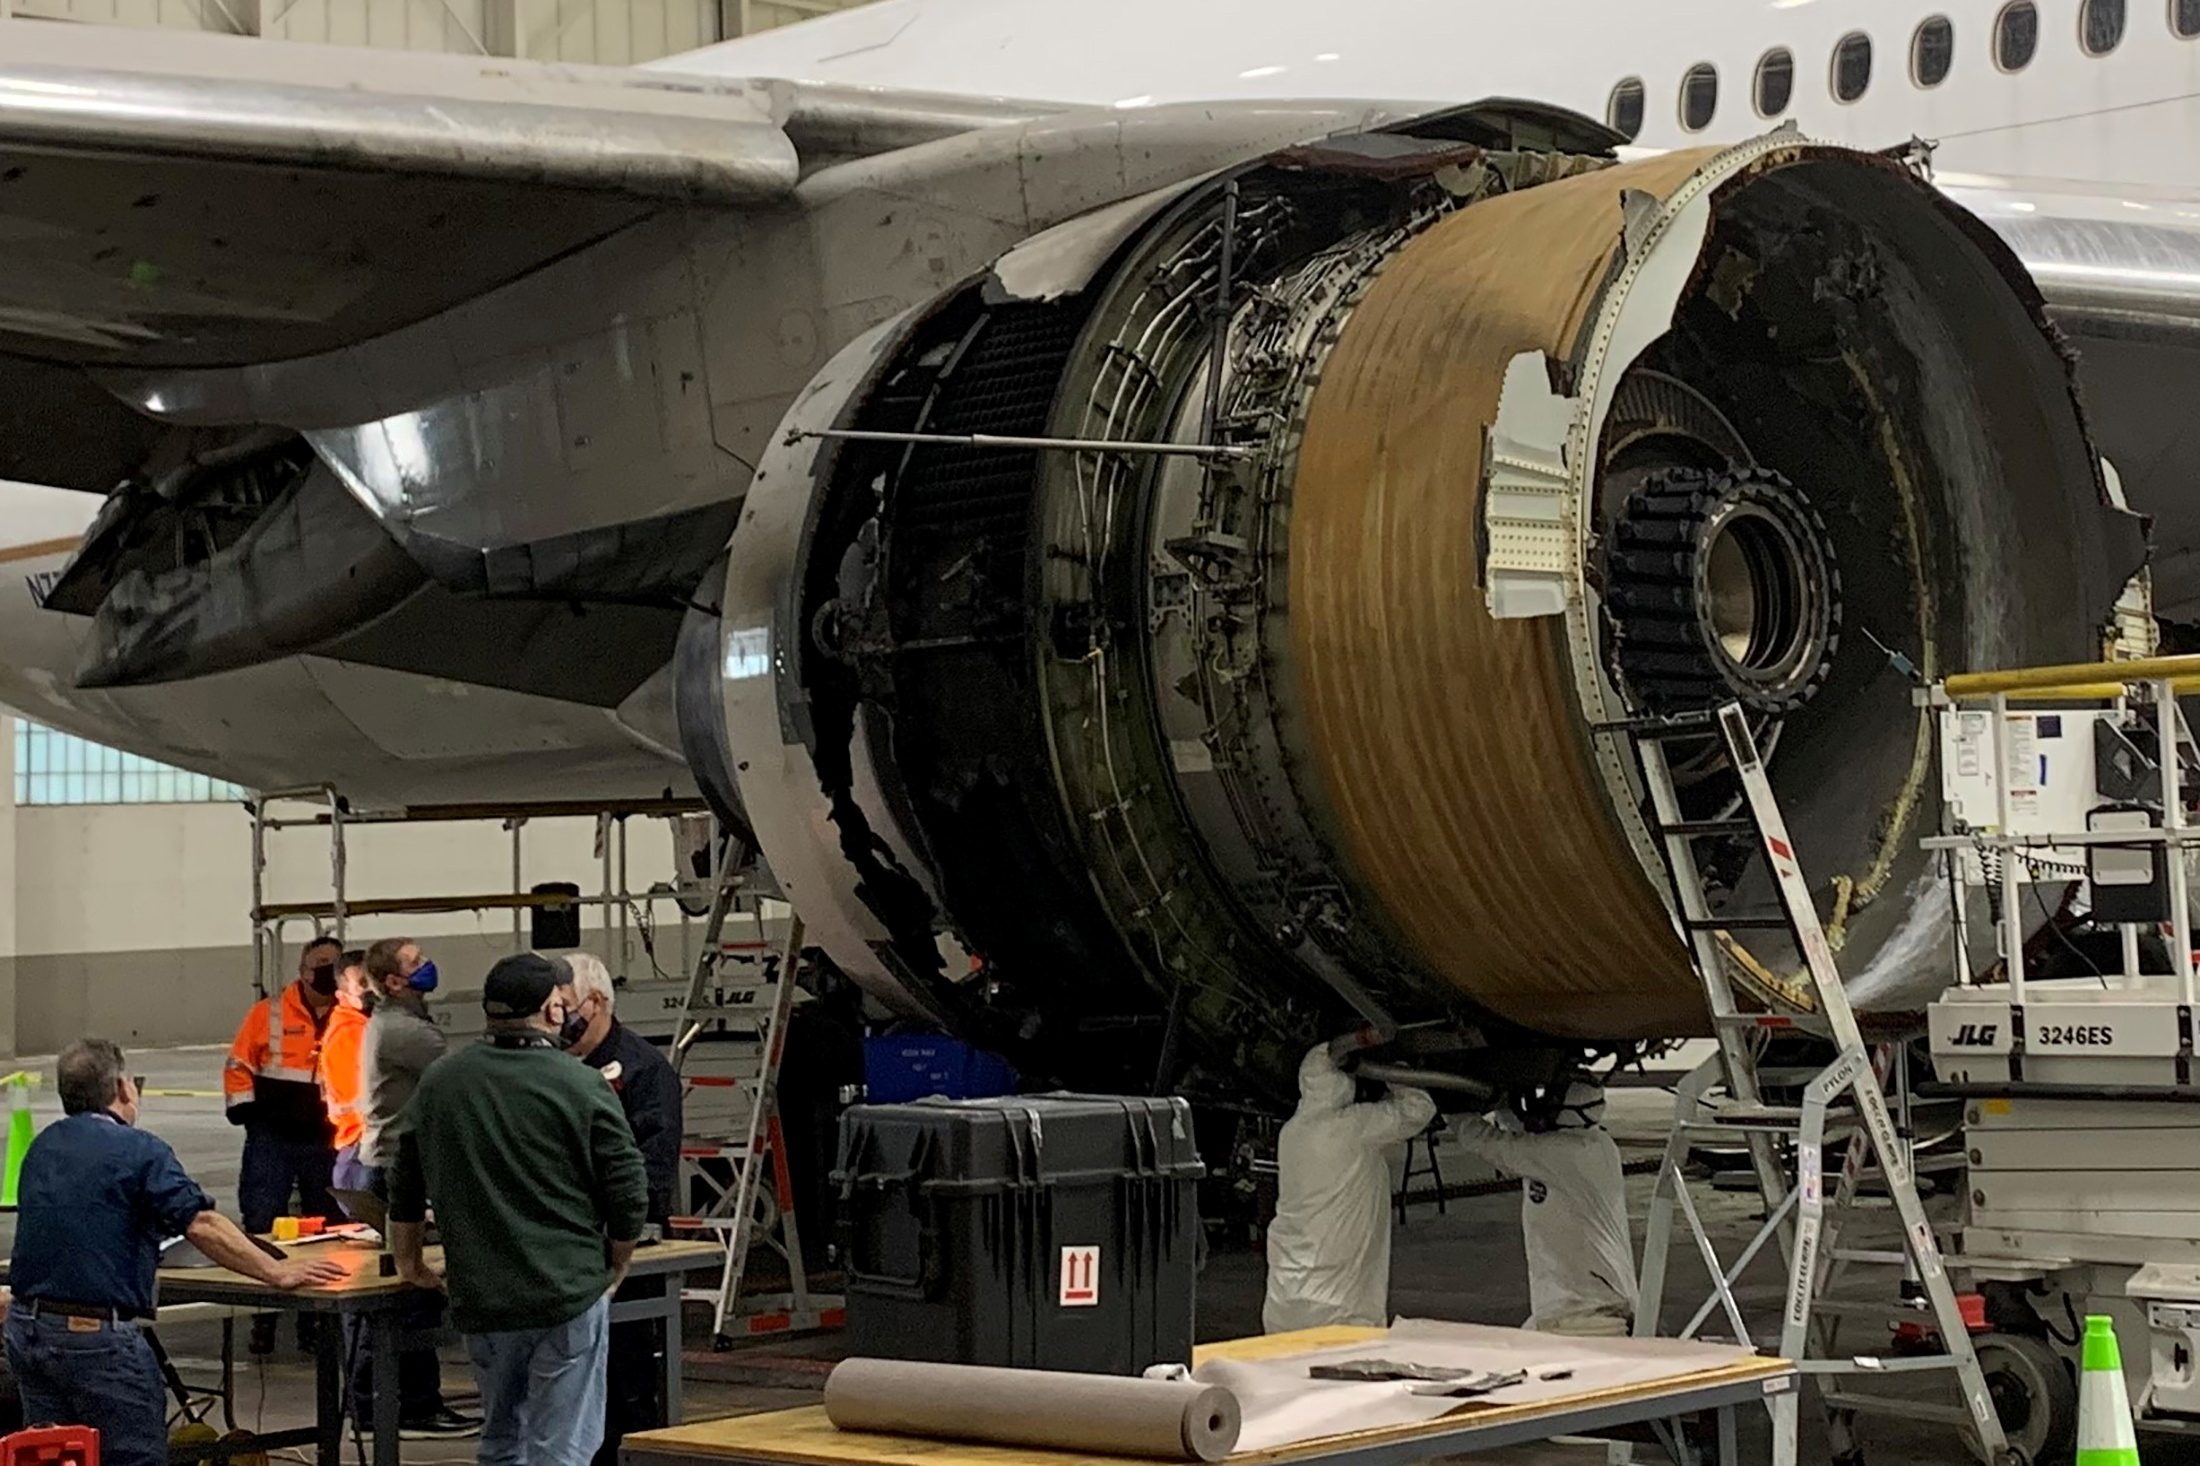 Damage to United Boeing 777 engine consistent with metal fatigue